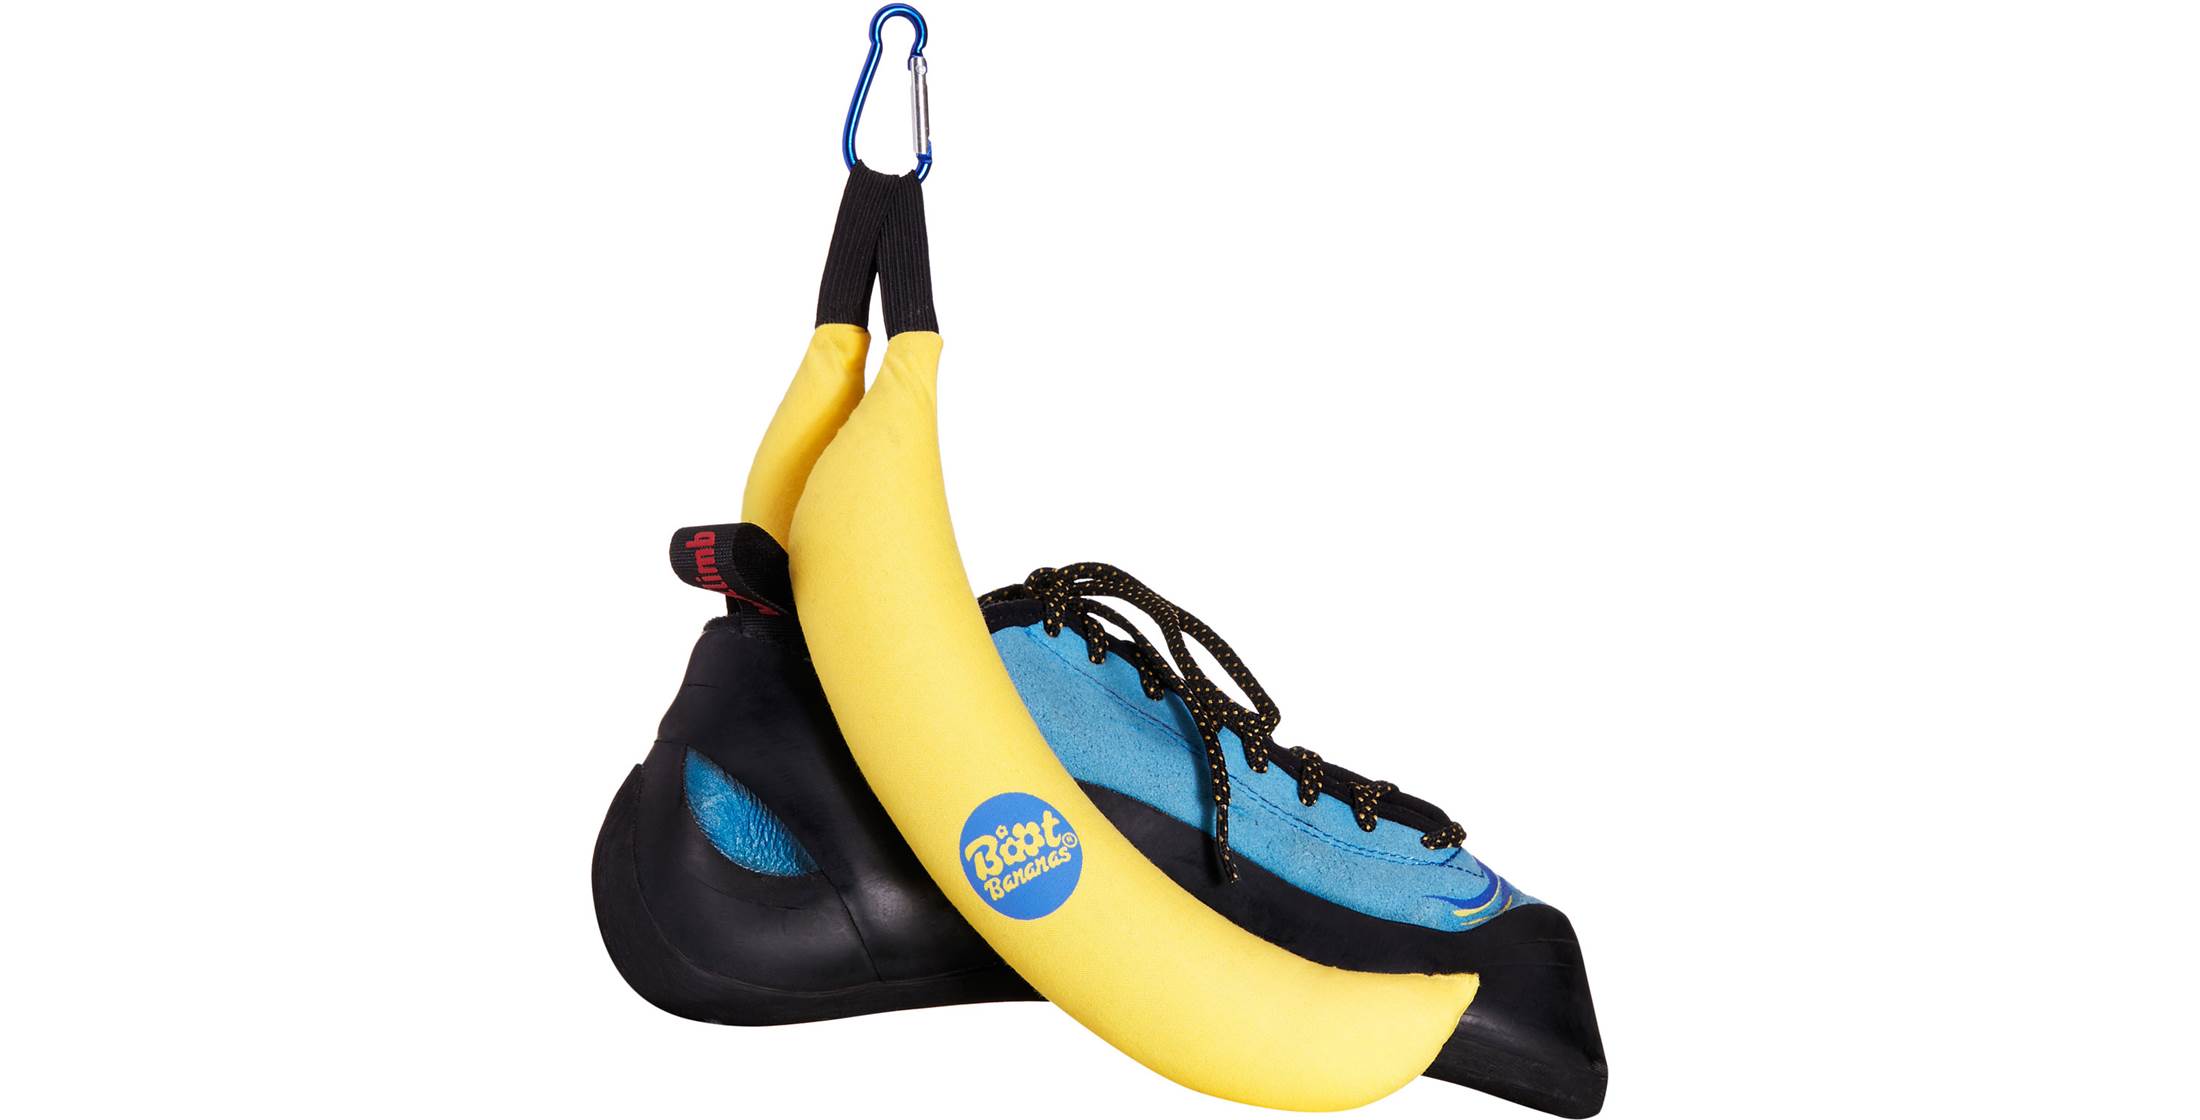 Boot banana product photo. Boot Bananas are a climbing shoe deodorizer that looks like a regular-sized, yellow banana. They are marketed as a solution for when your climbing shoes smell bad